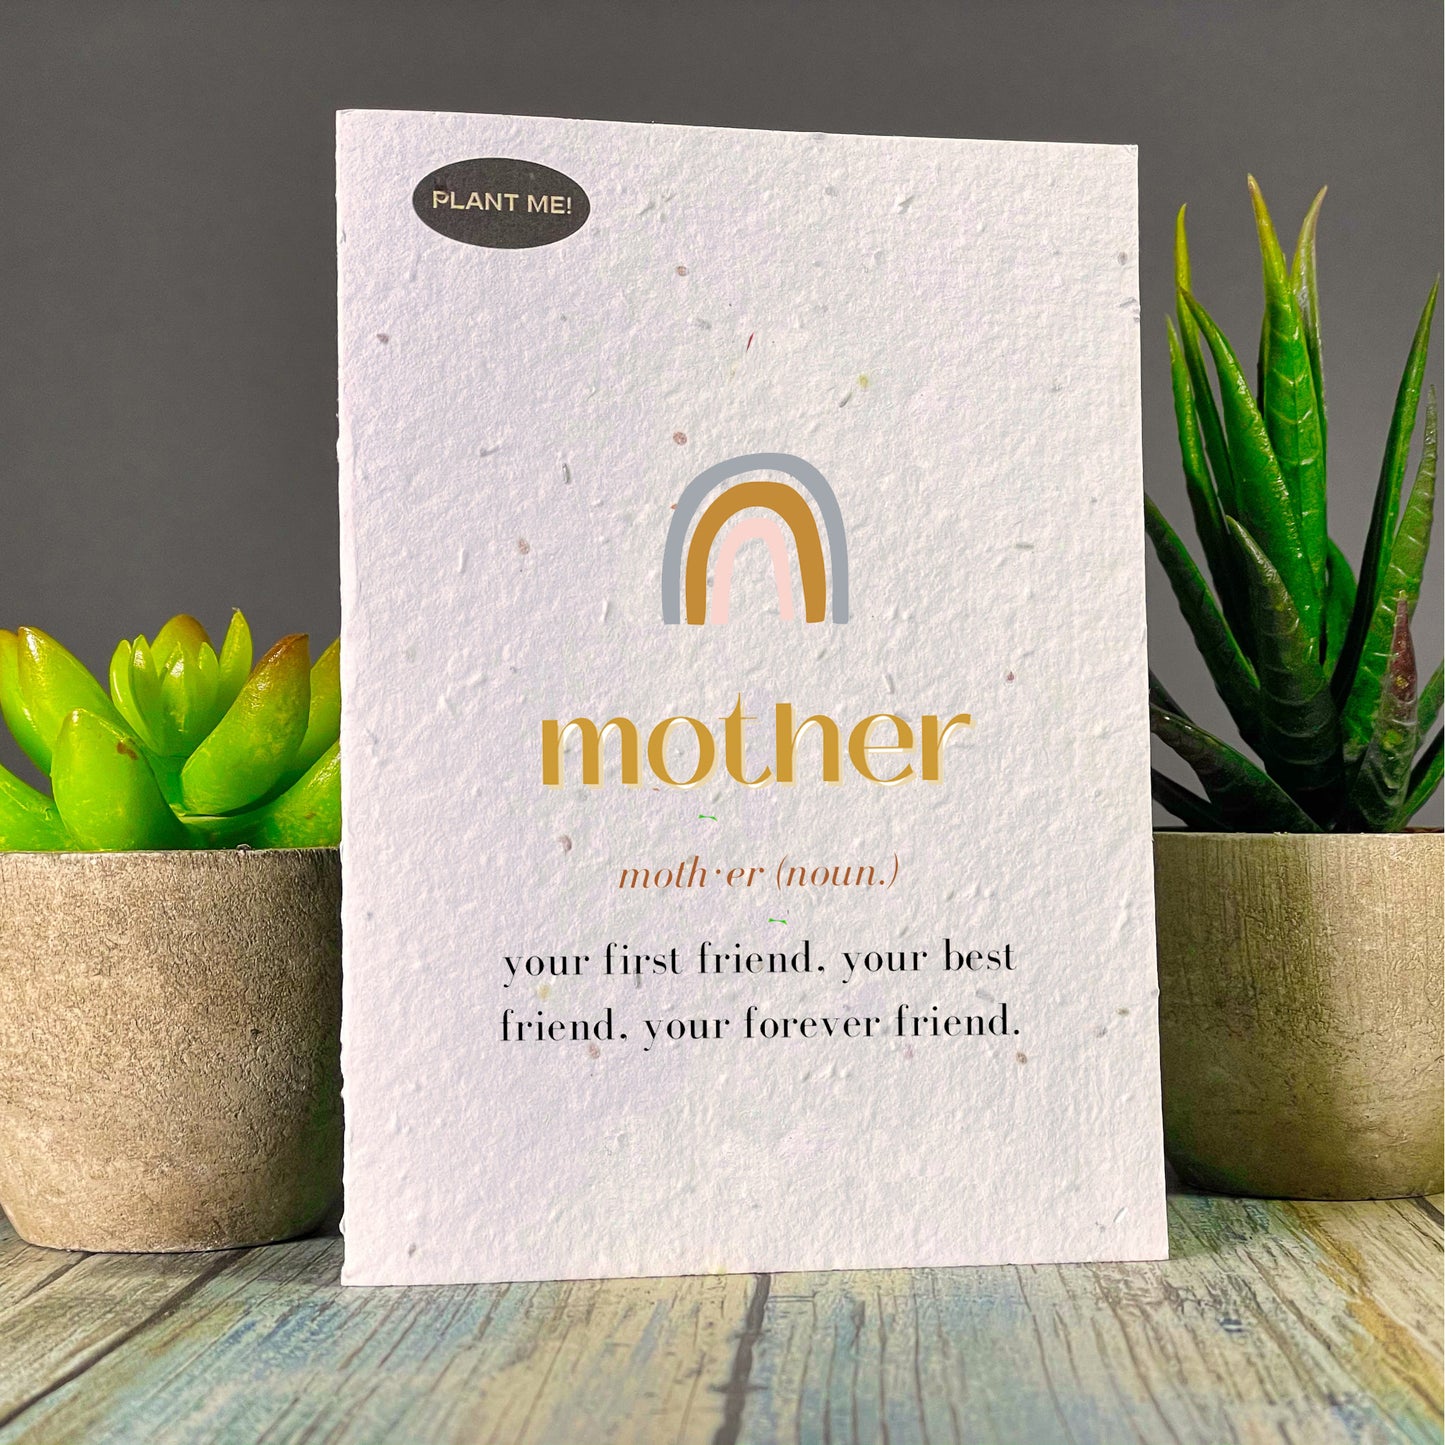 Mother - Noun Mothers Day Plantable Greeting Card